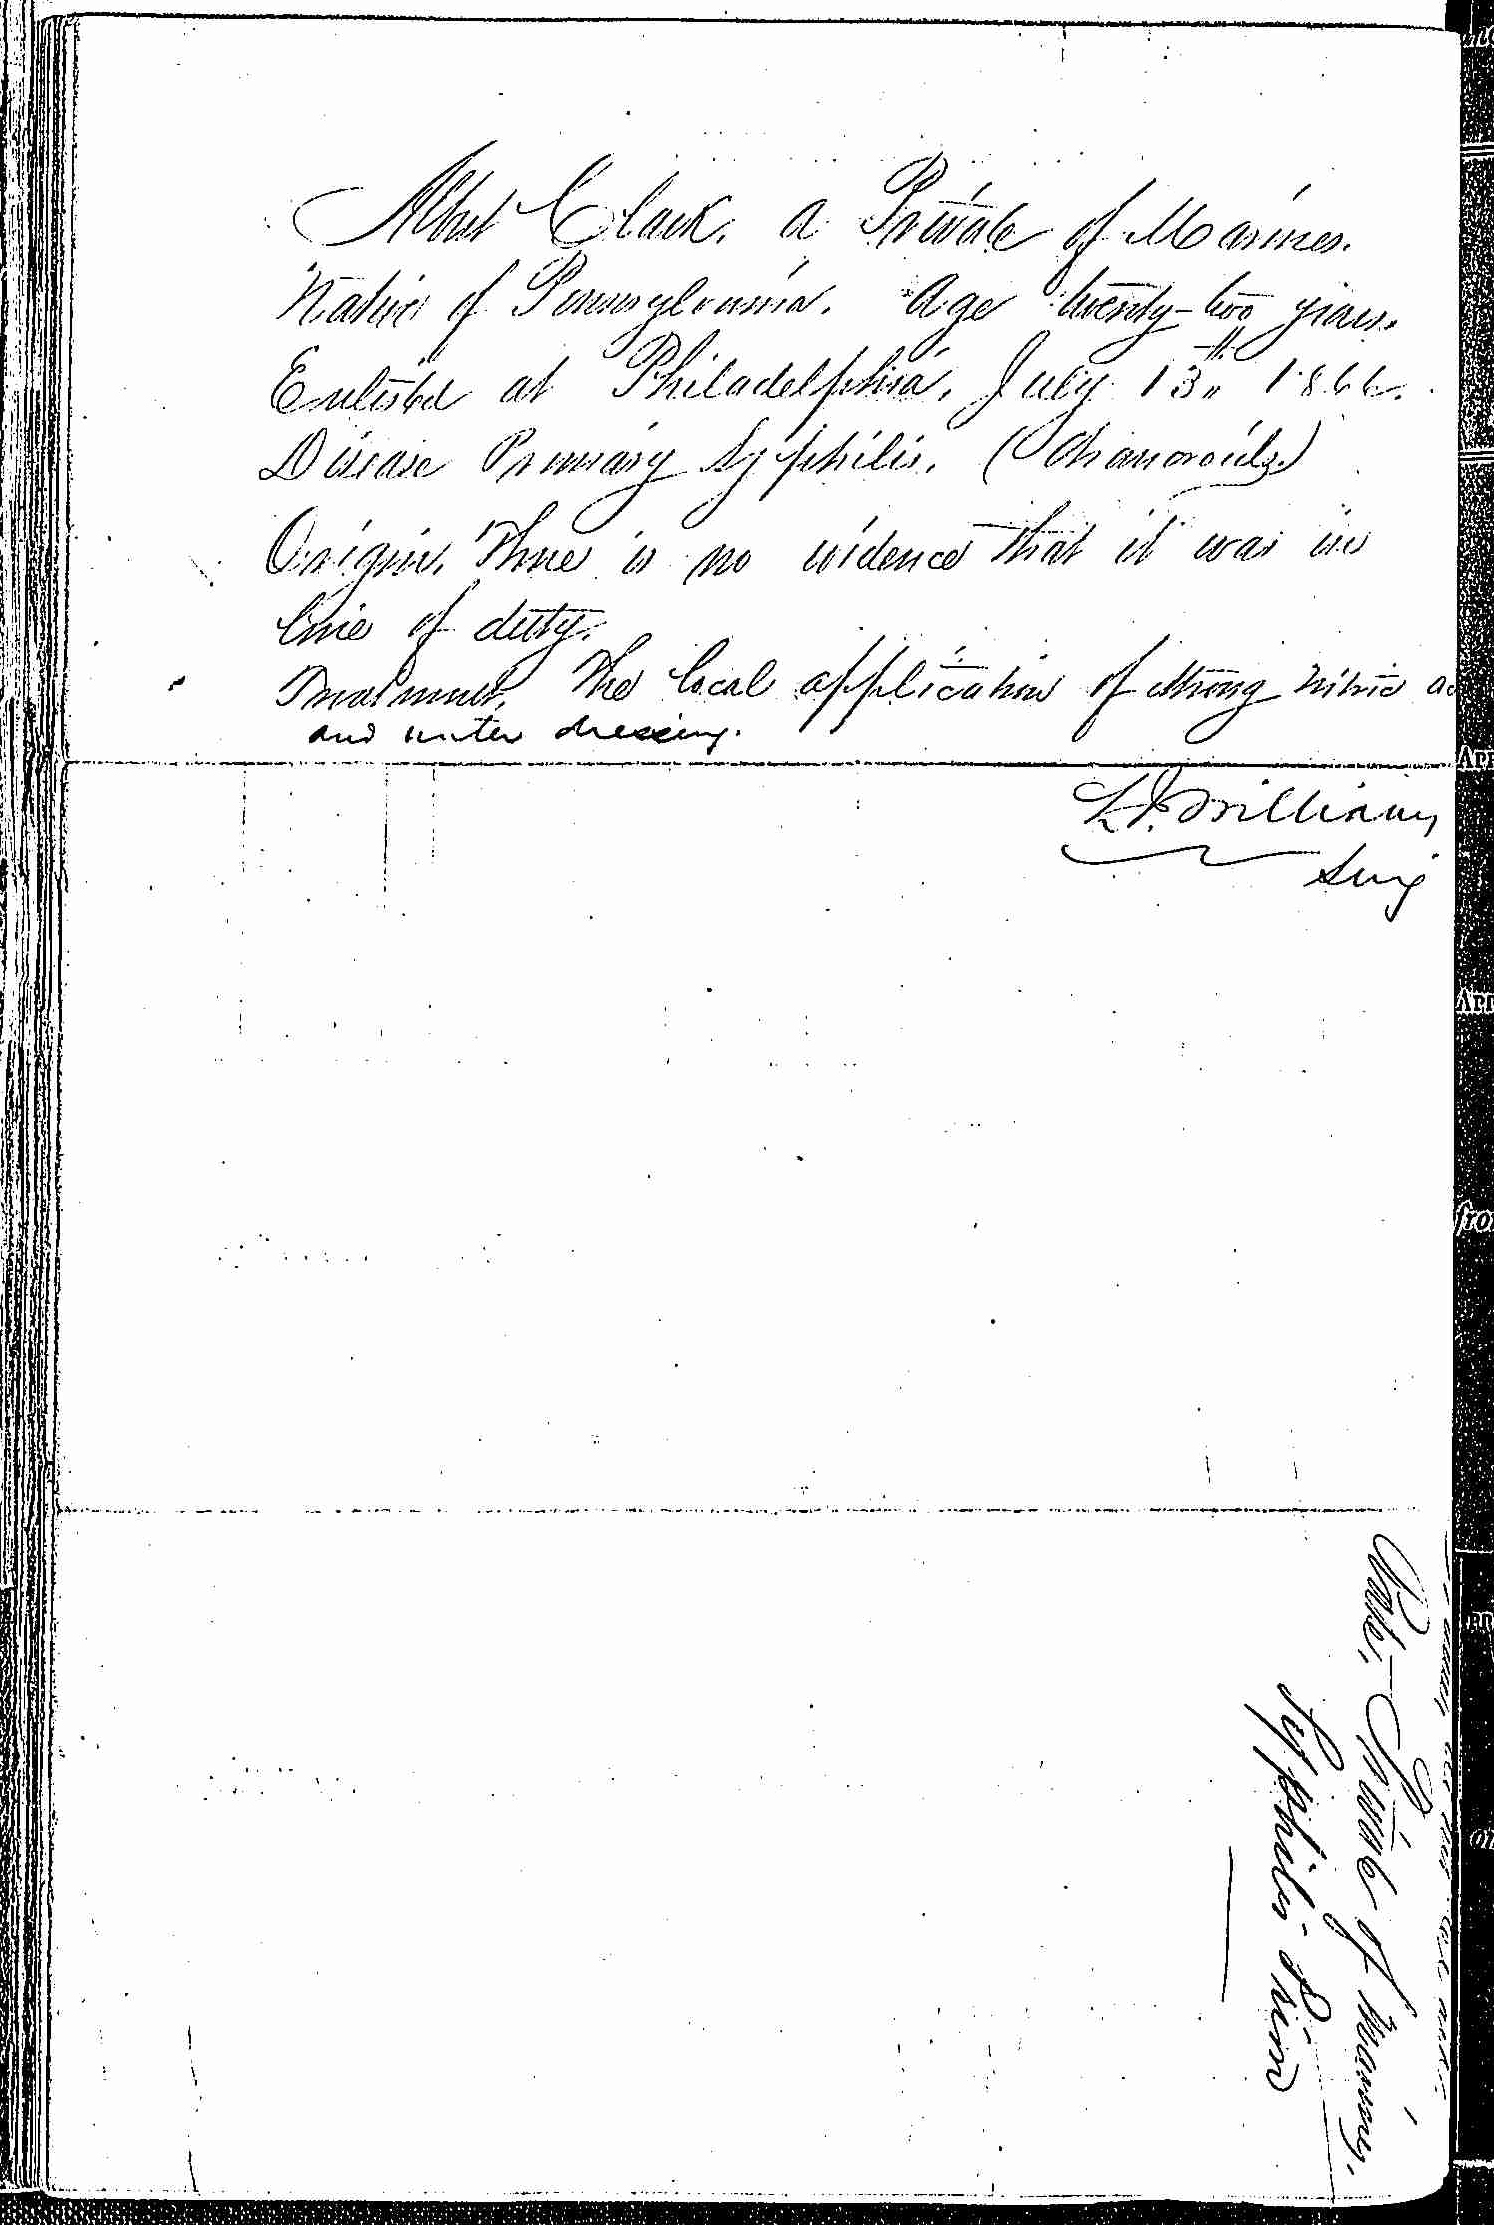 Entry for Albert Clark (page 2 of 2) in the log Hospital Tickets and Case Papers - Naval Hospital - Washington, D.C. - 1865-68